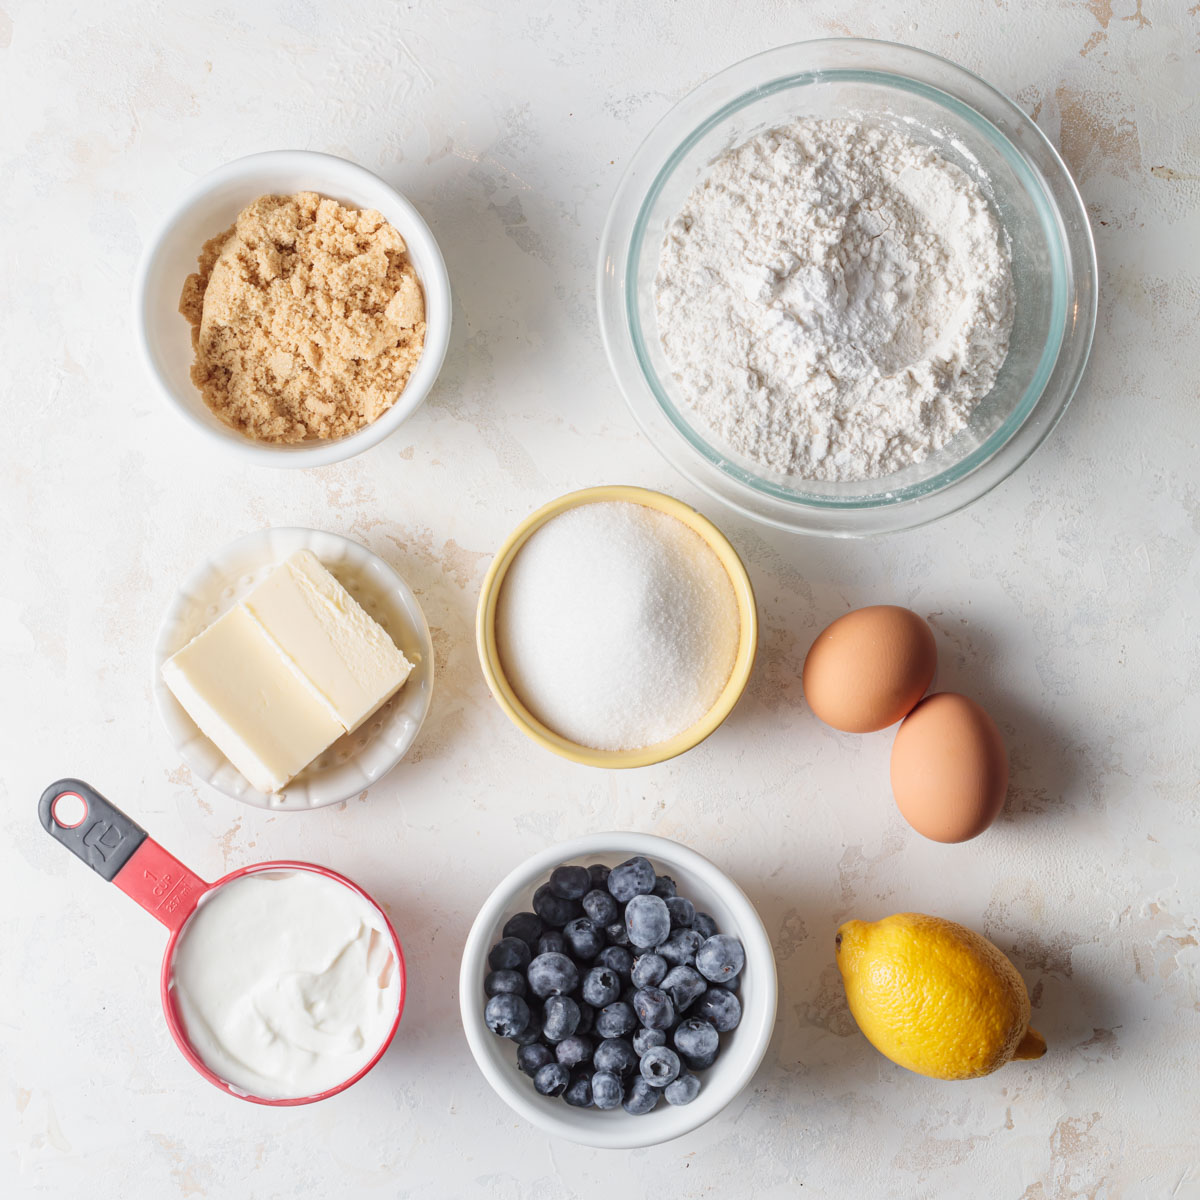 An image of all the ingredients needed to blueberry lemon crumb cake